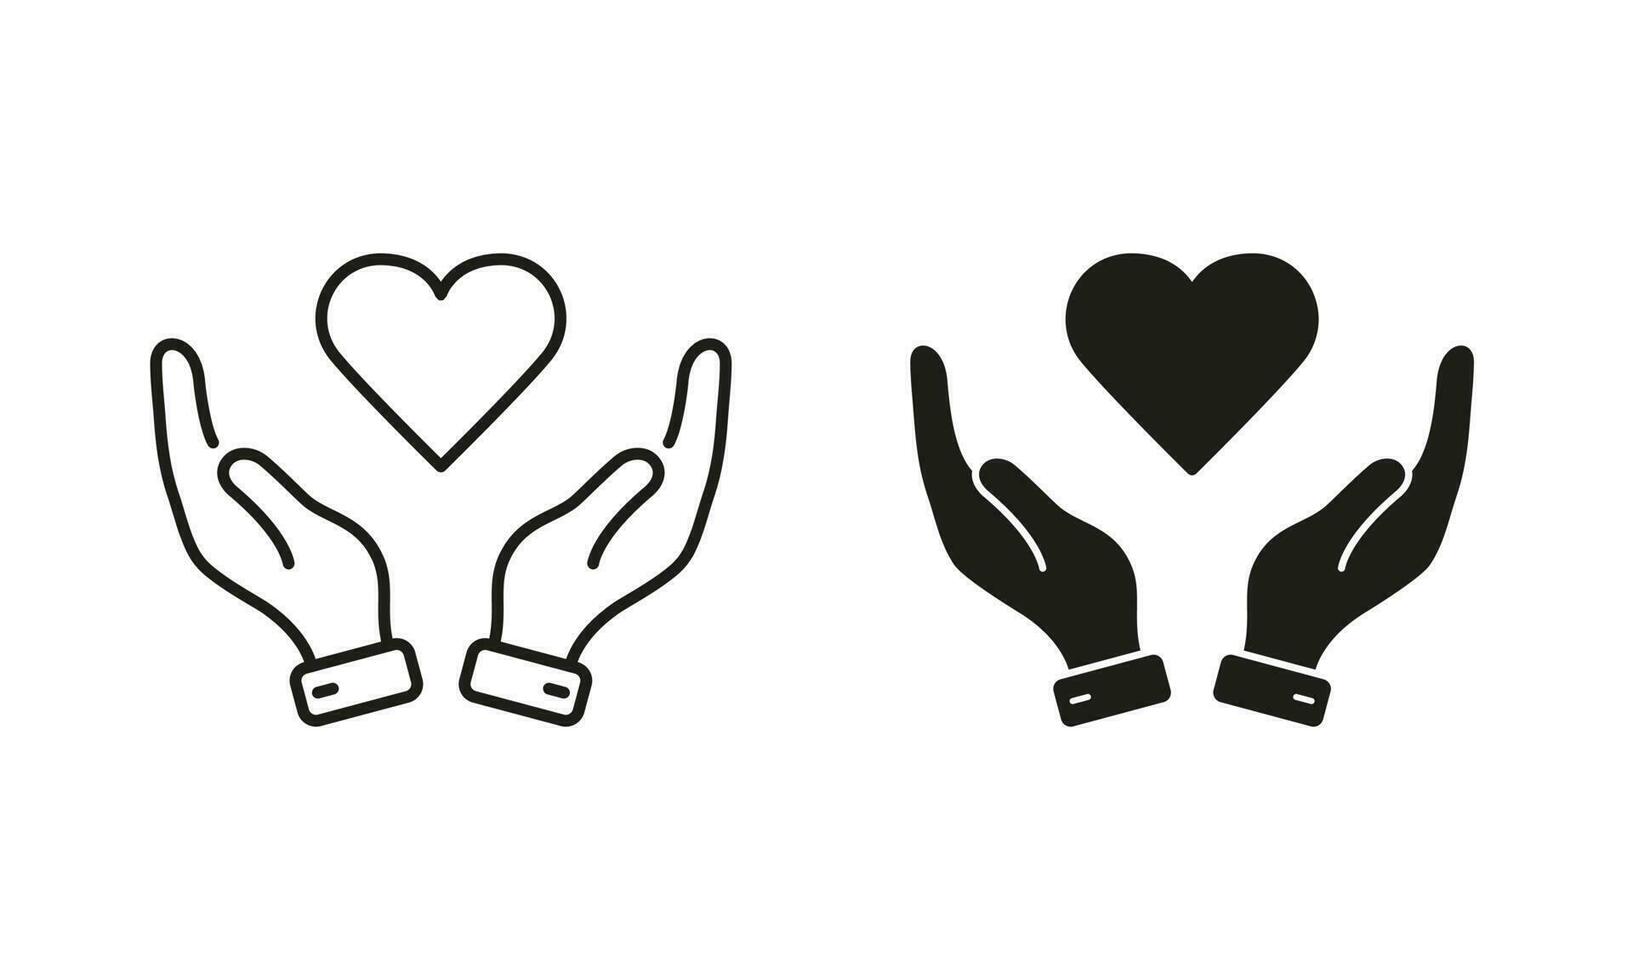 Peace Friendship, Emotional Support Symbol Collection. Love, Health, Charity, Care, Help Line and Silhouette Icon Set. Human Hand and Heart Shape Pictogram. Isolated Vector Illustration.